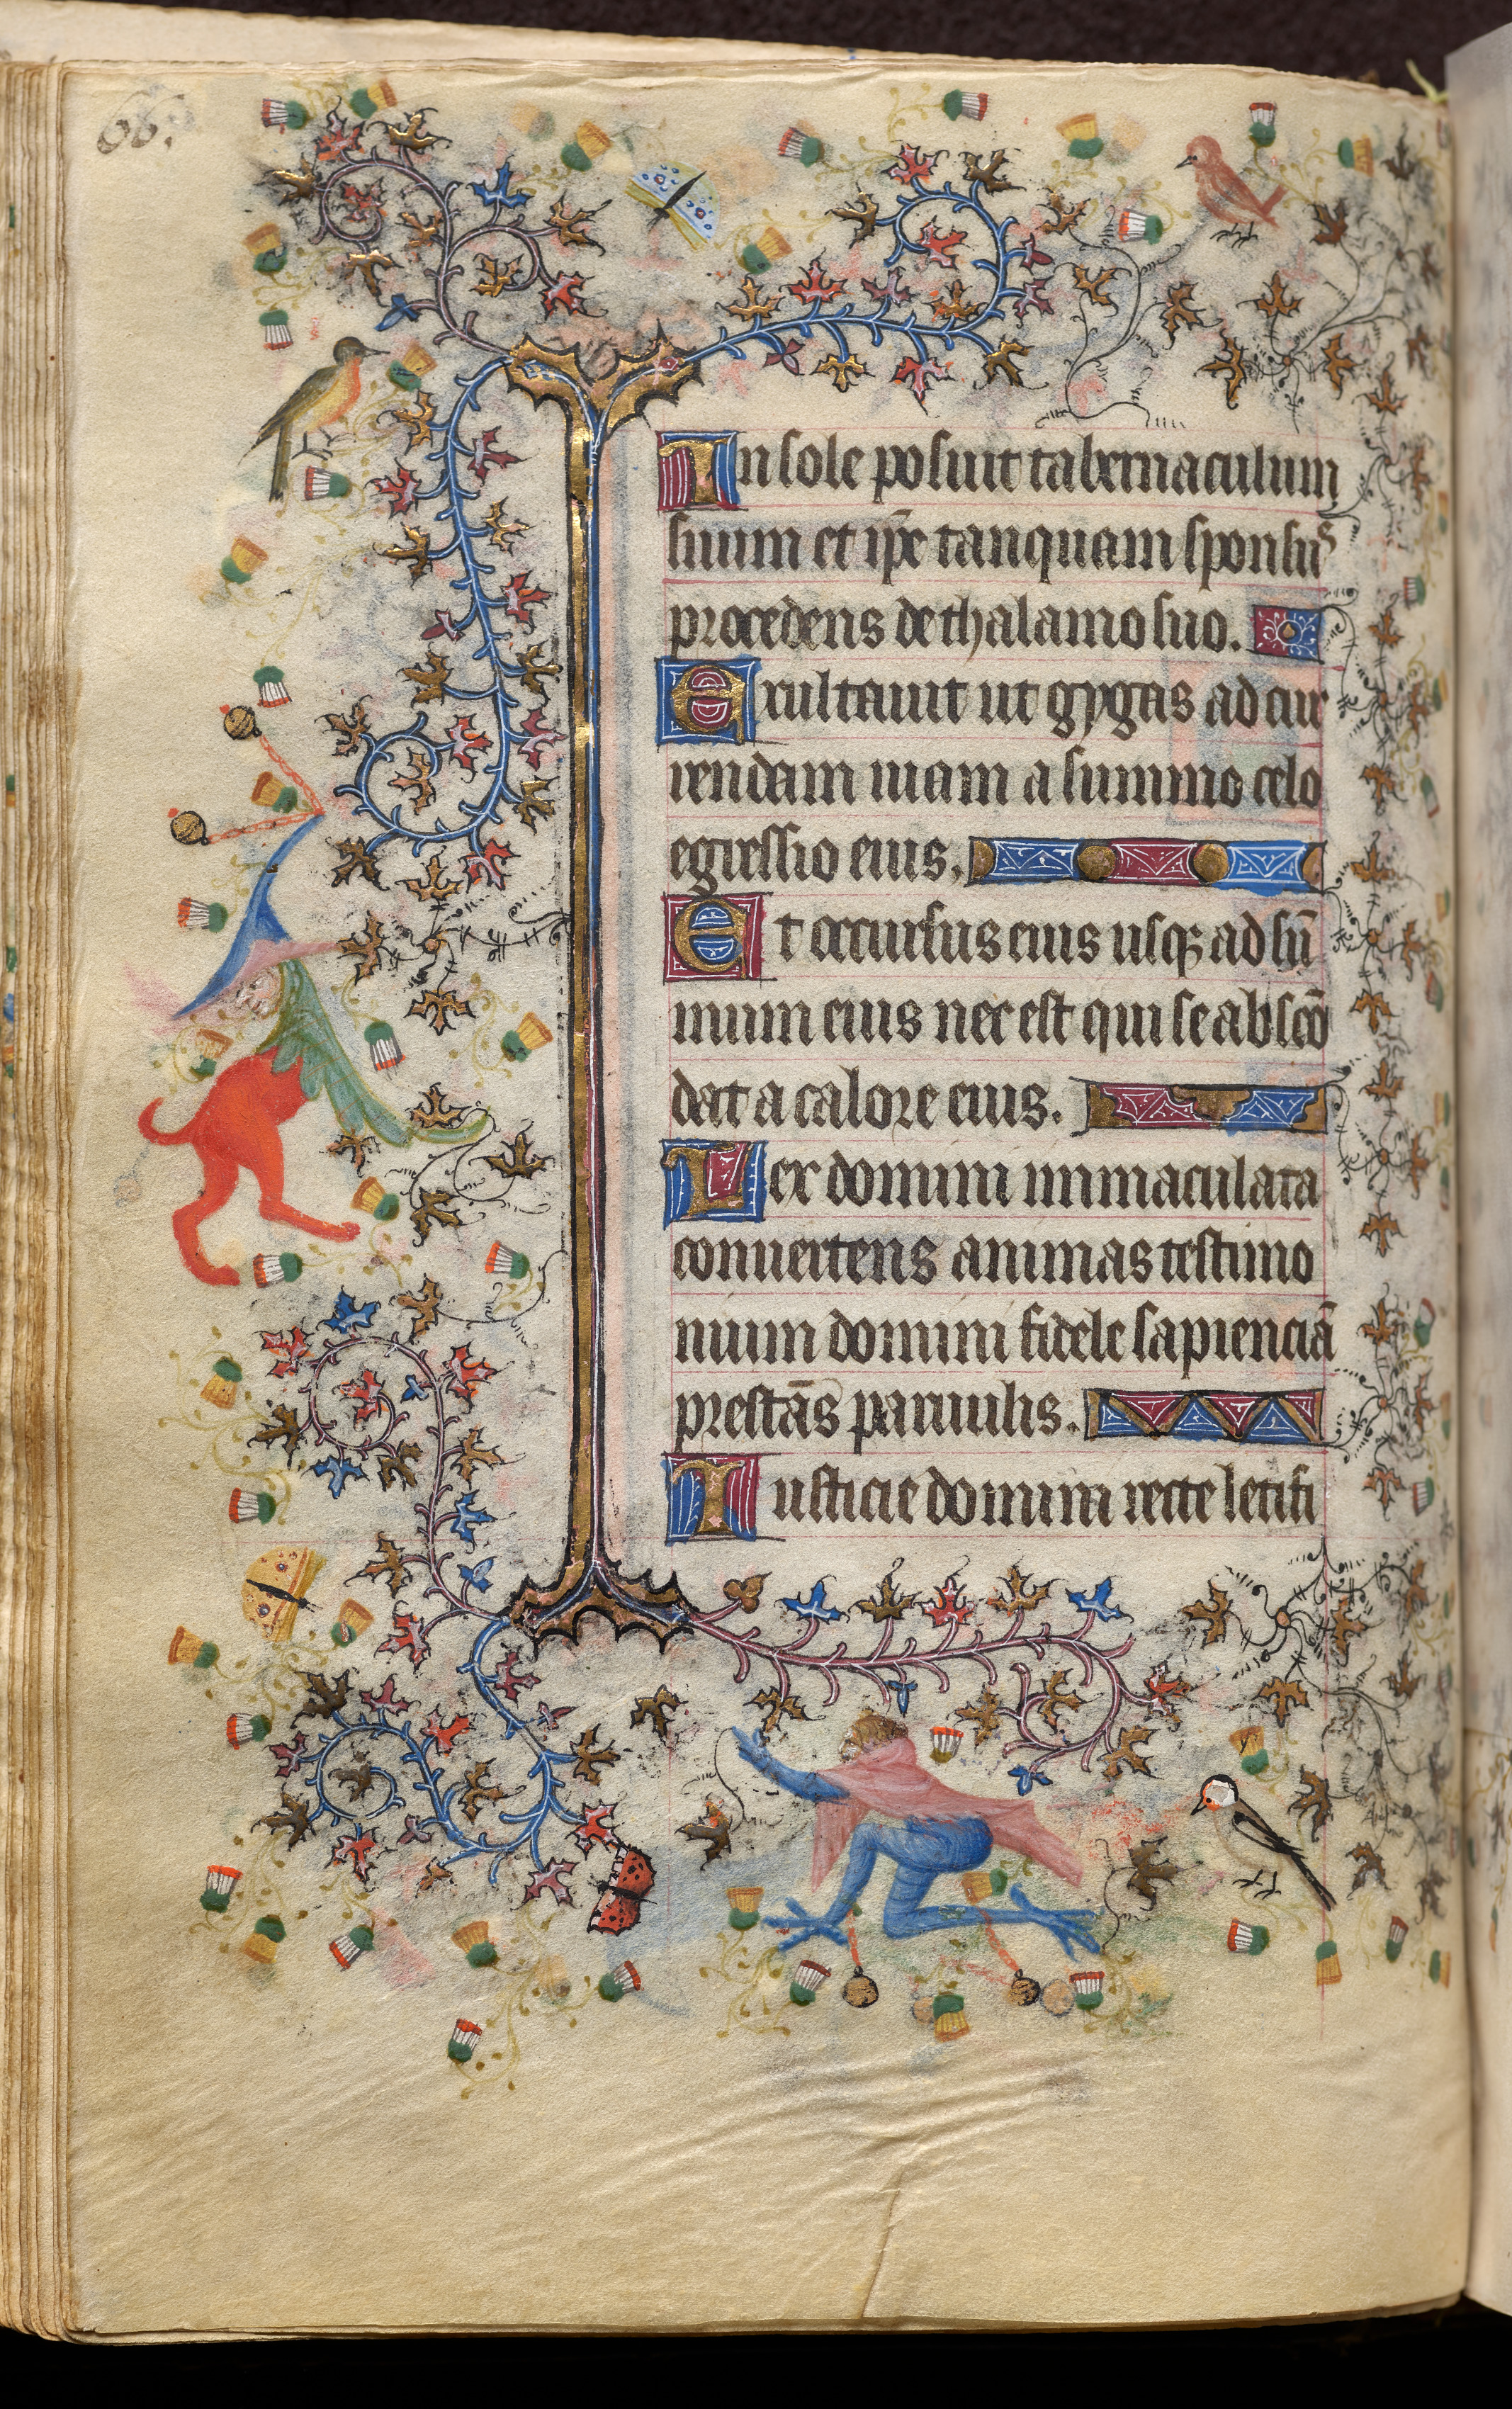 Hours of Charles the Noble, King of Navarre (1361-1425): fol. 33v, Text